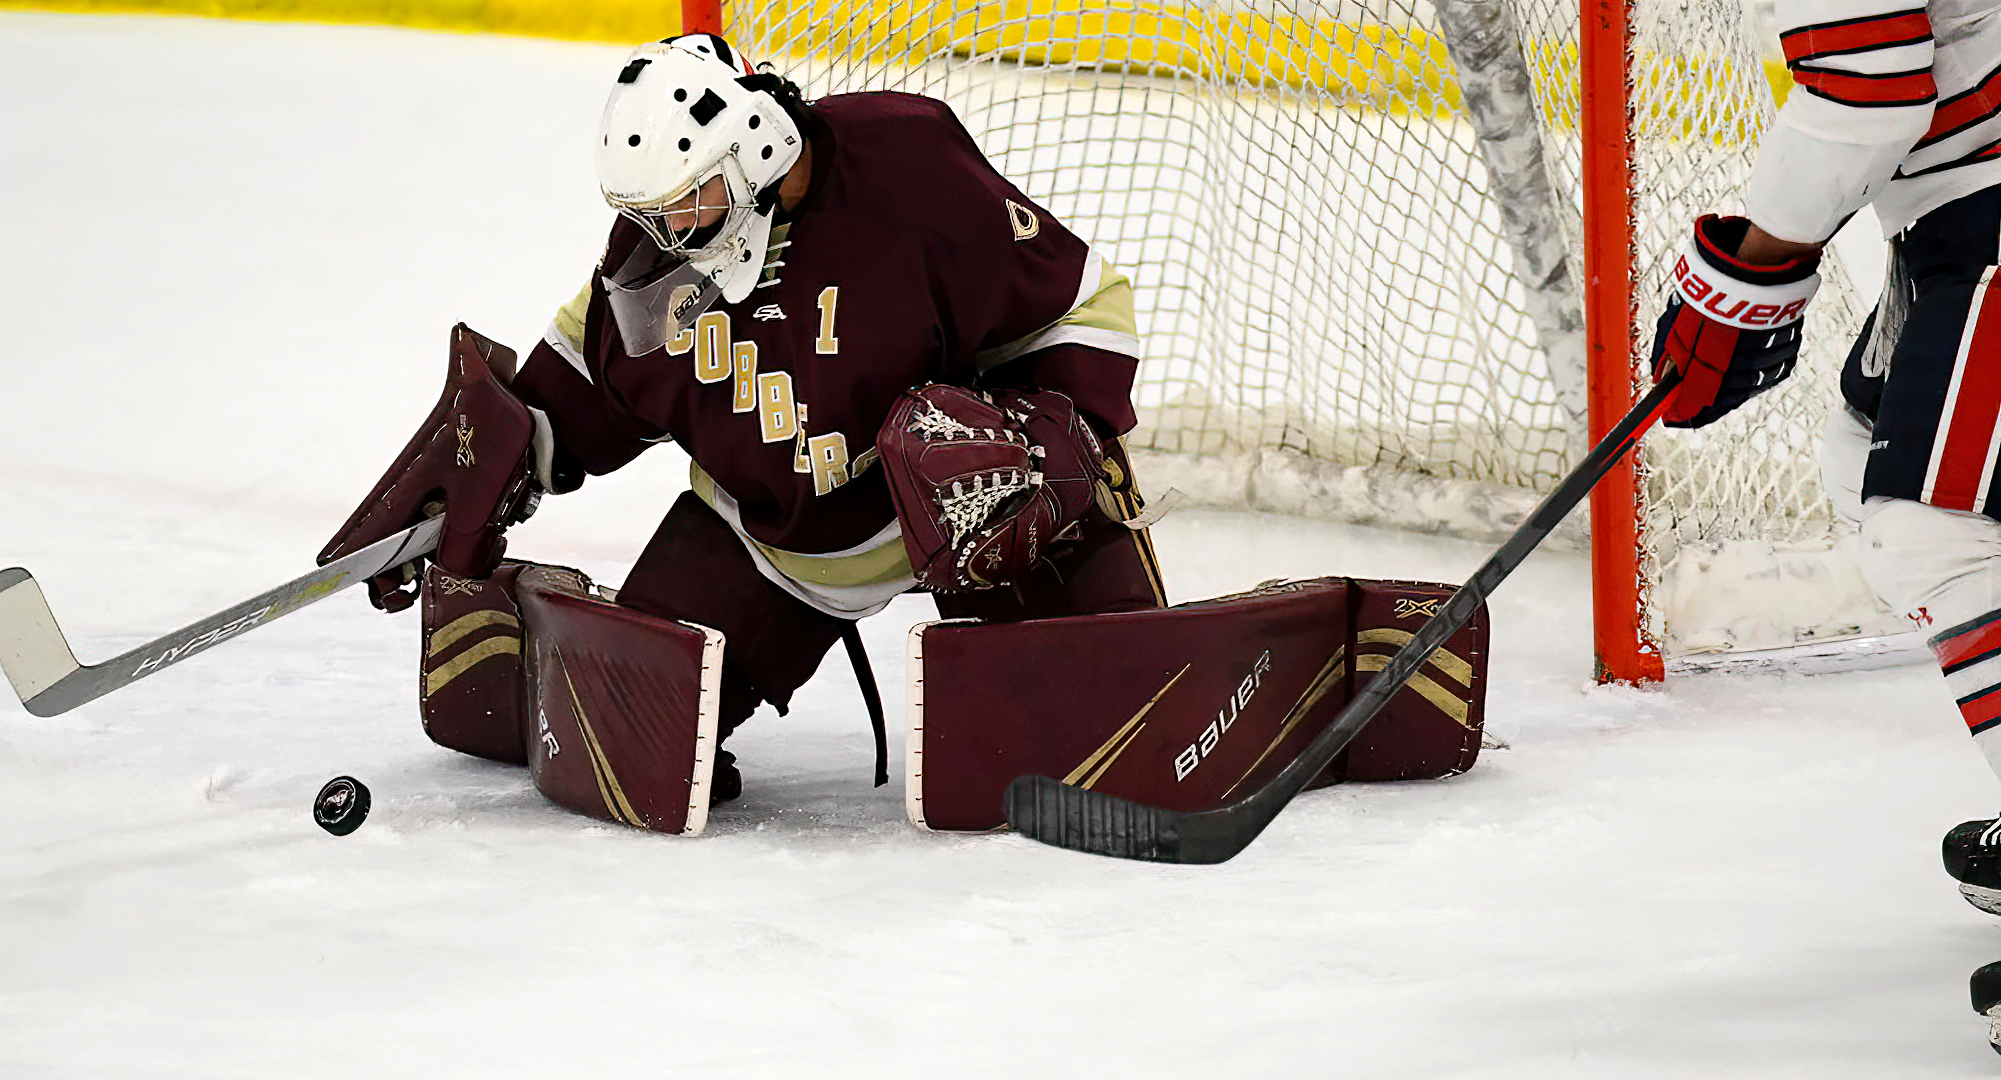 Matt Fitzgerald makes one of his 68 saves in the Cobbers' sweep at St. Mary's. Fitzgerald is 7-2-1 in the last 10 games. (Photo courtesy of SMU SID)